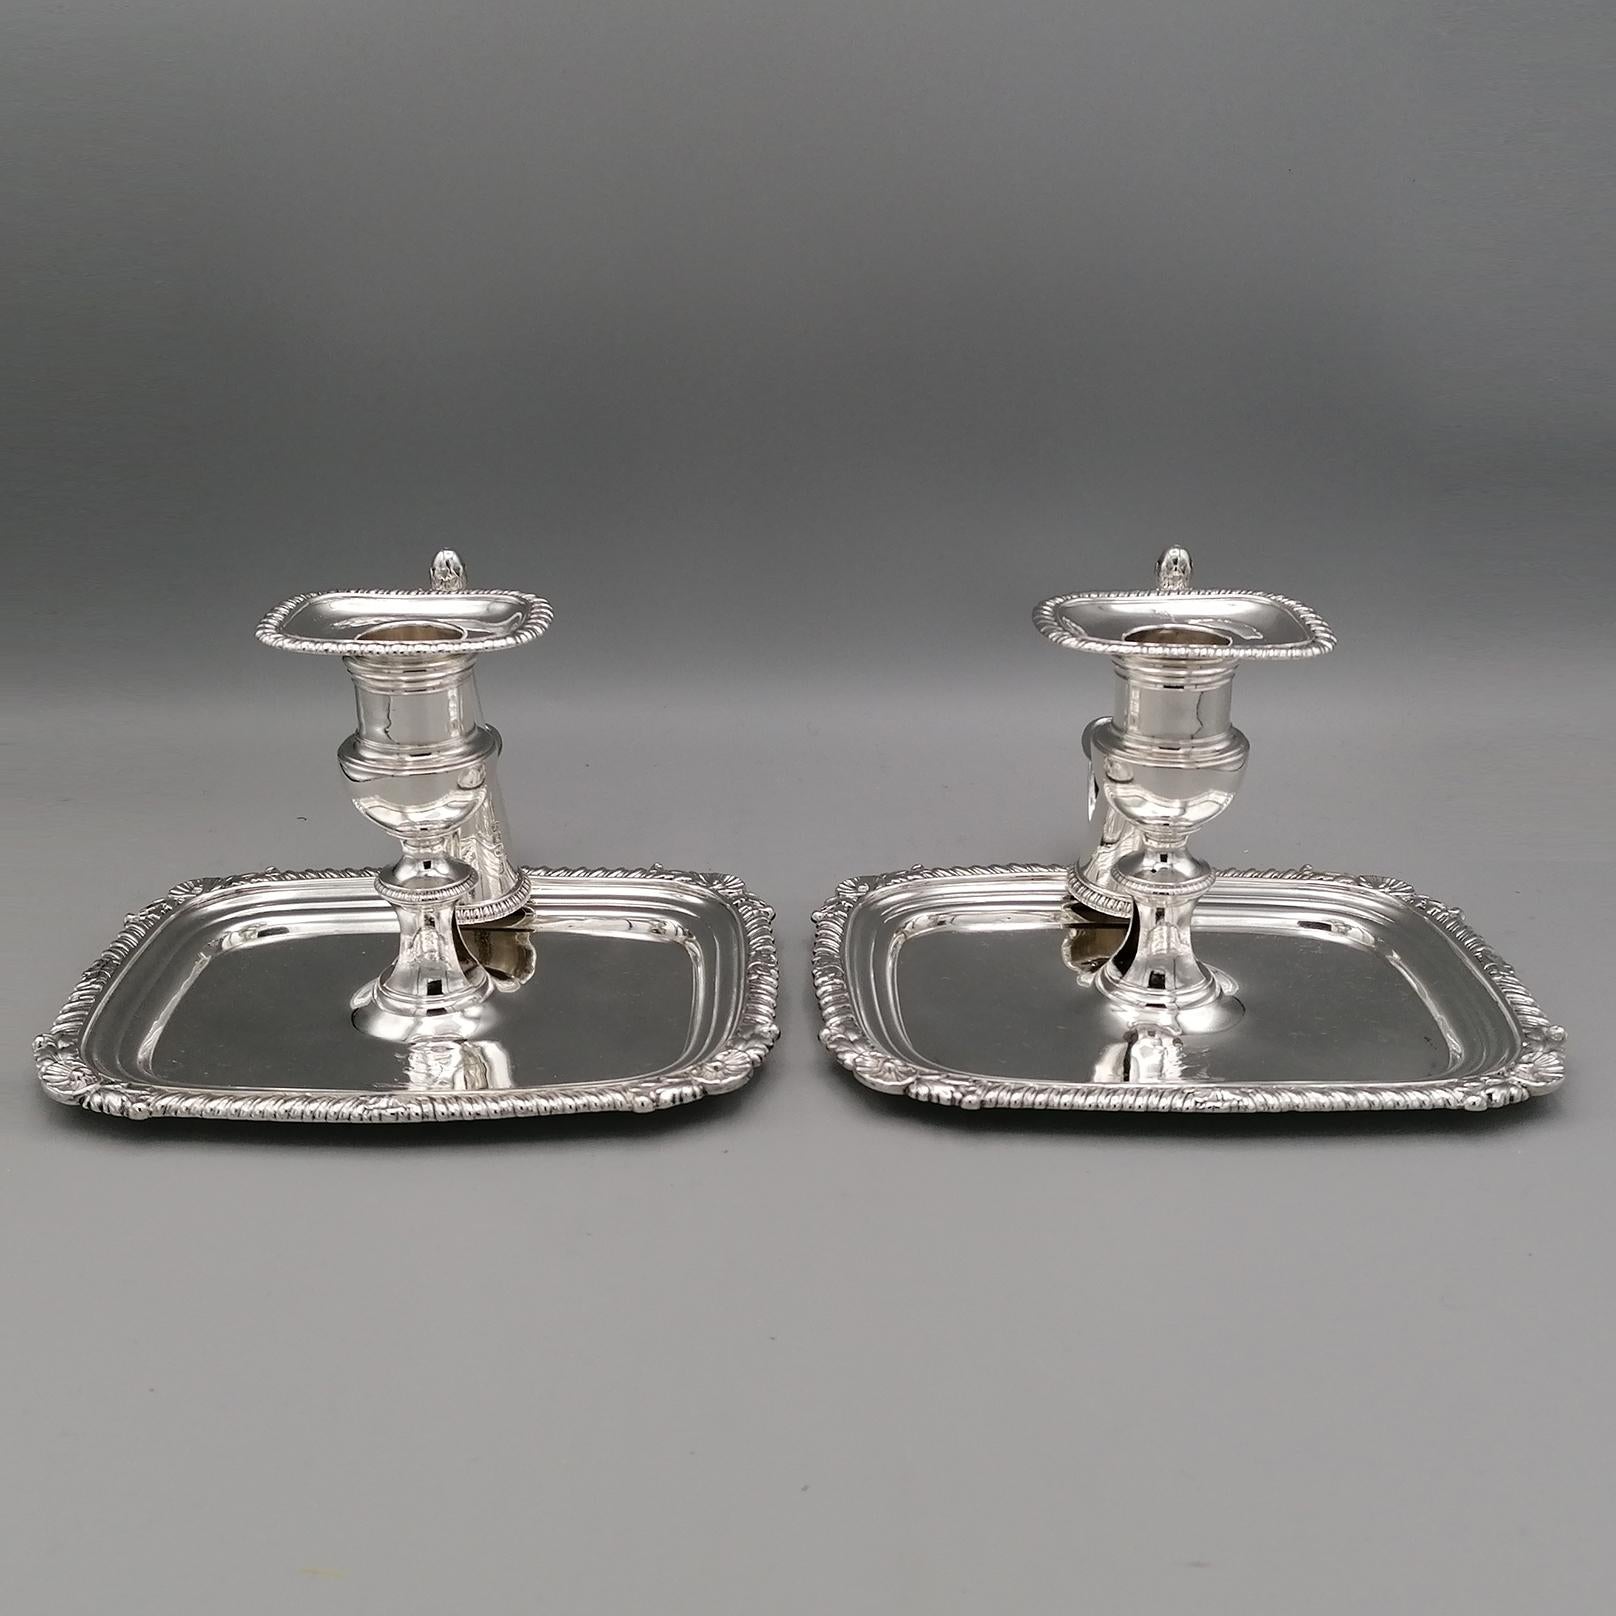 An important full marked Antique Georgian sterling silver pair of oblong chambersticks, having a rectangular body with a gadroon & shell border, a side-handle with original removable snuffer. 
These elegant antique silver chambersticks was made by